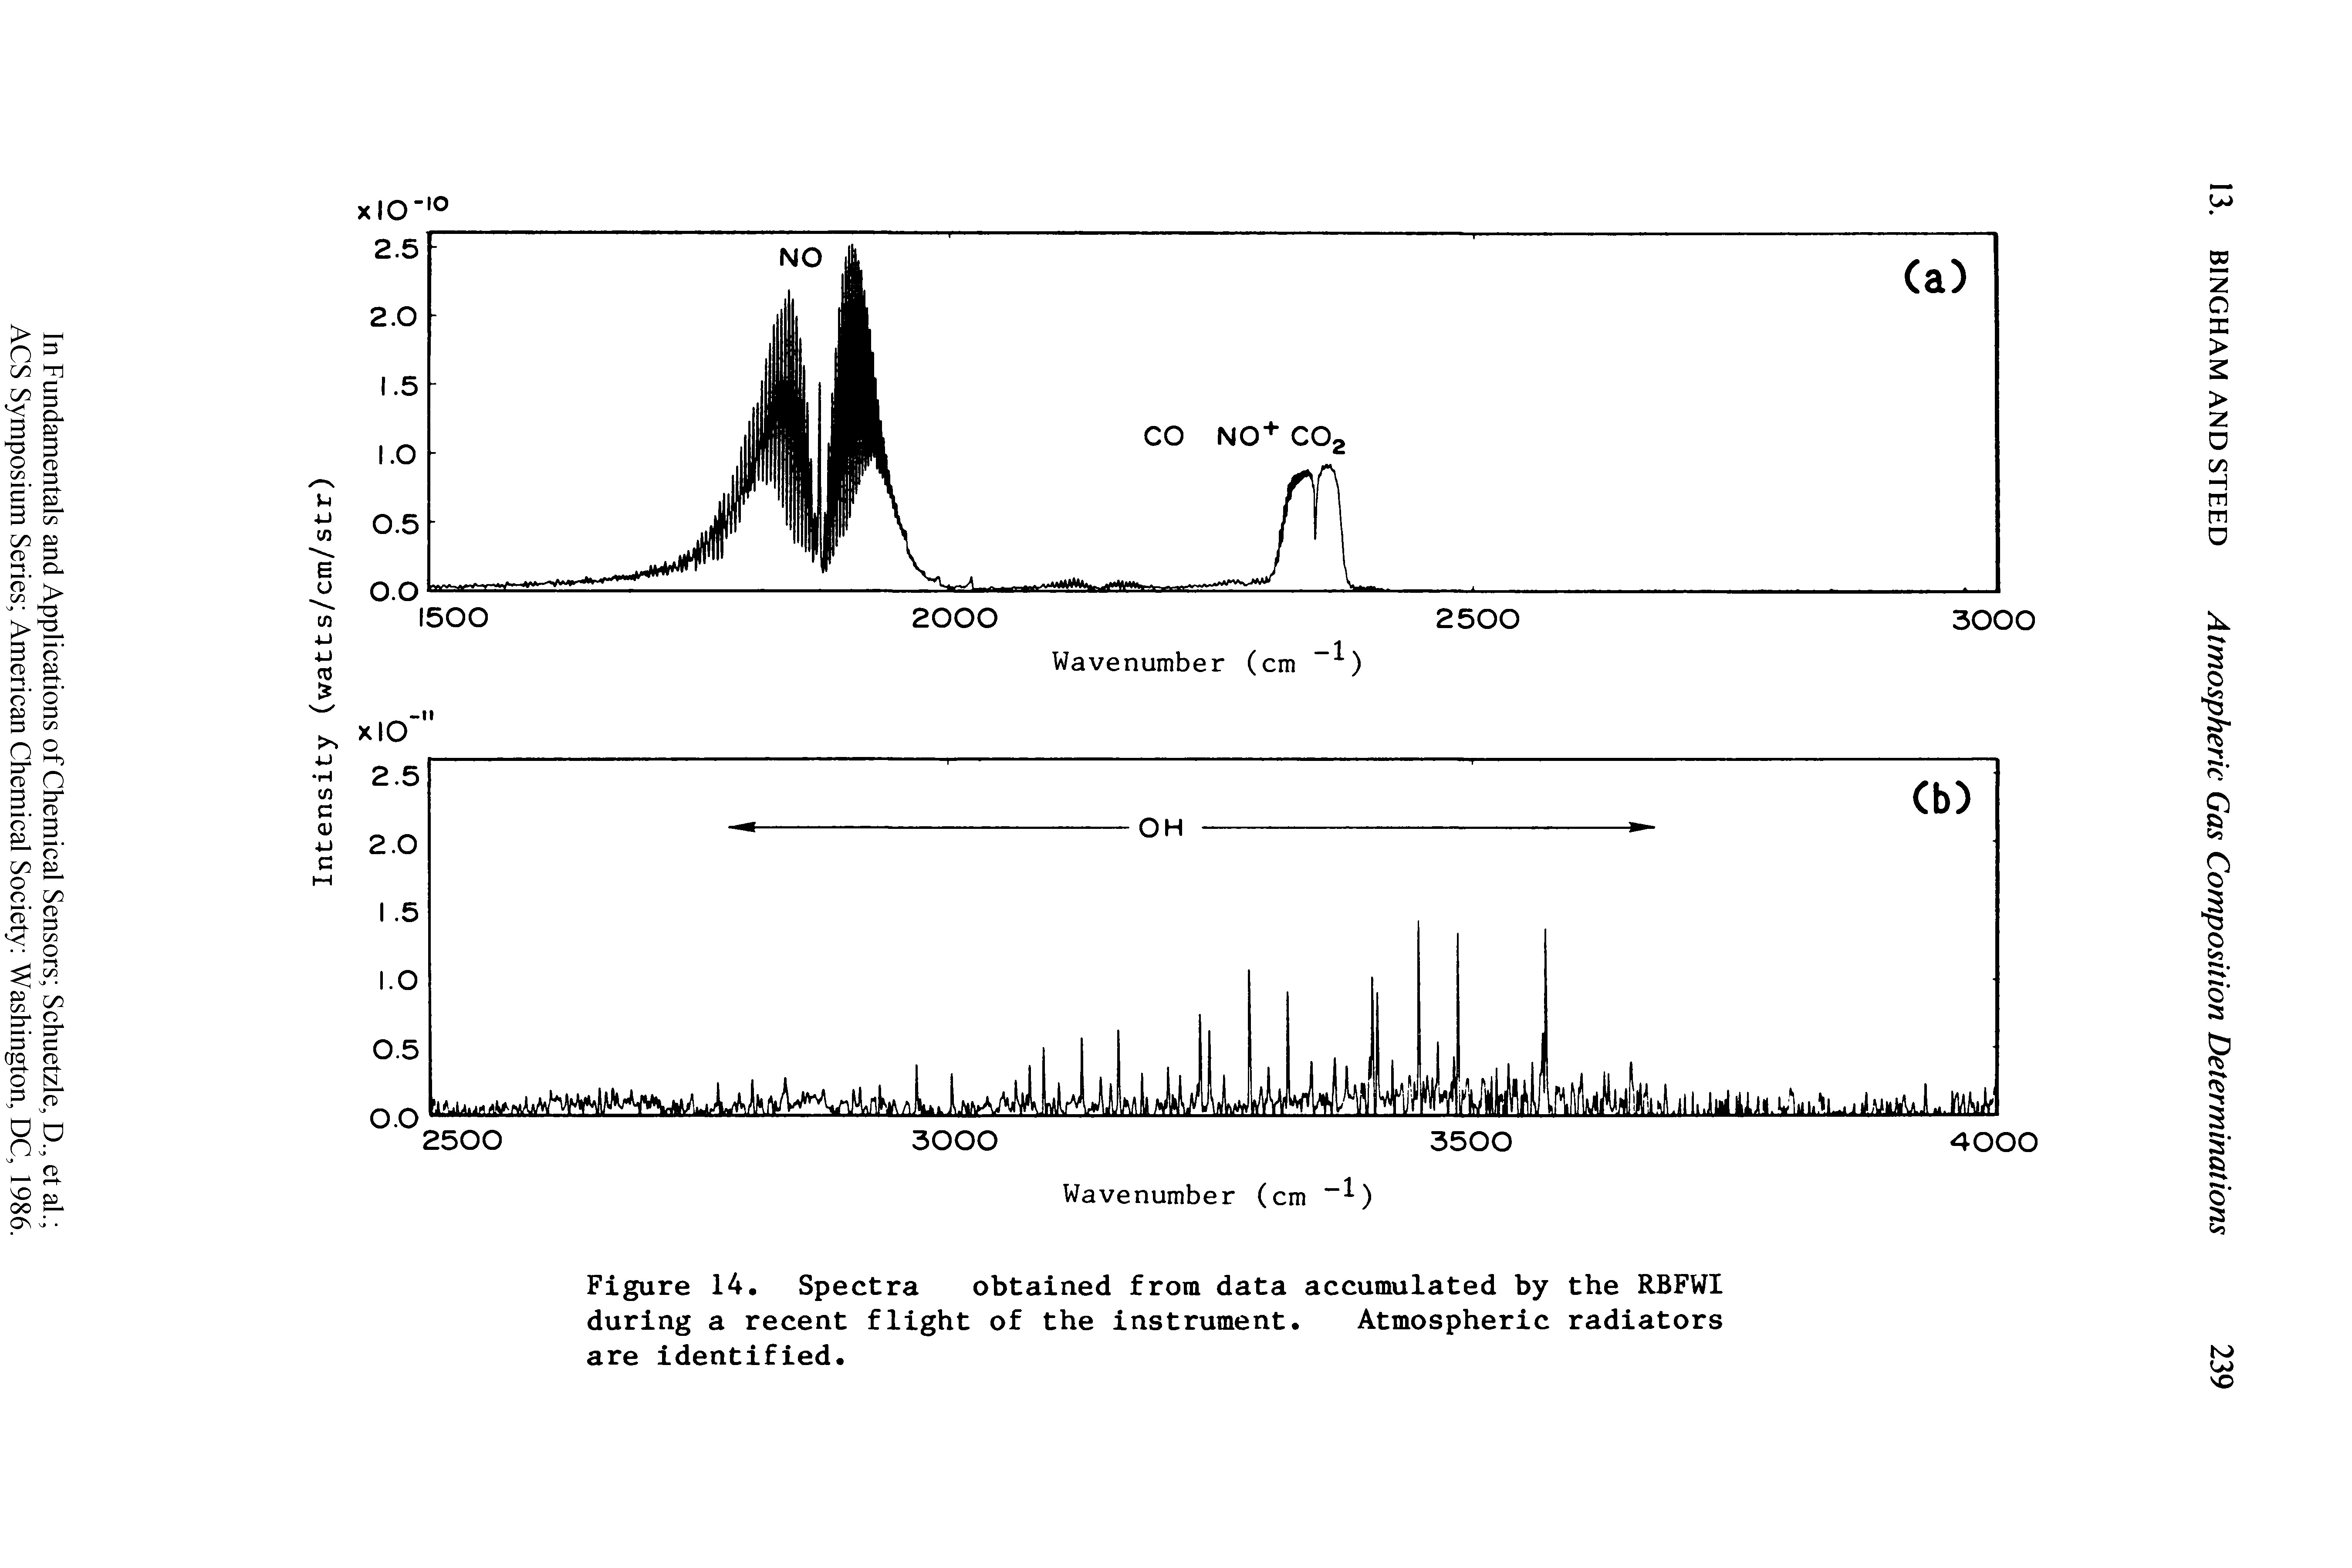 Figure 14. Spectra obtained from data accumulated by the RBFWI during a recent flight of the instrument. Atmospheric radiators are identified.